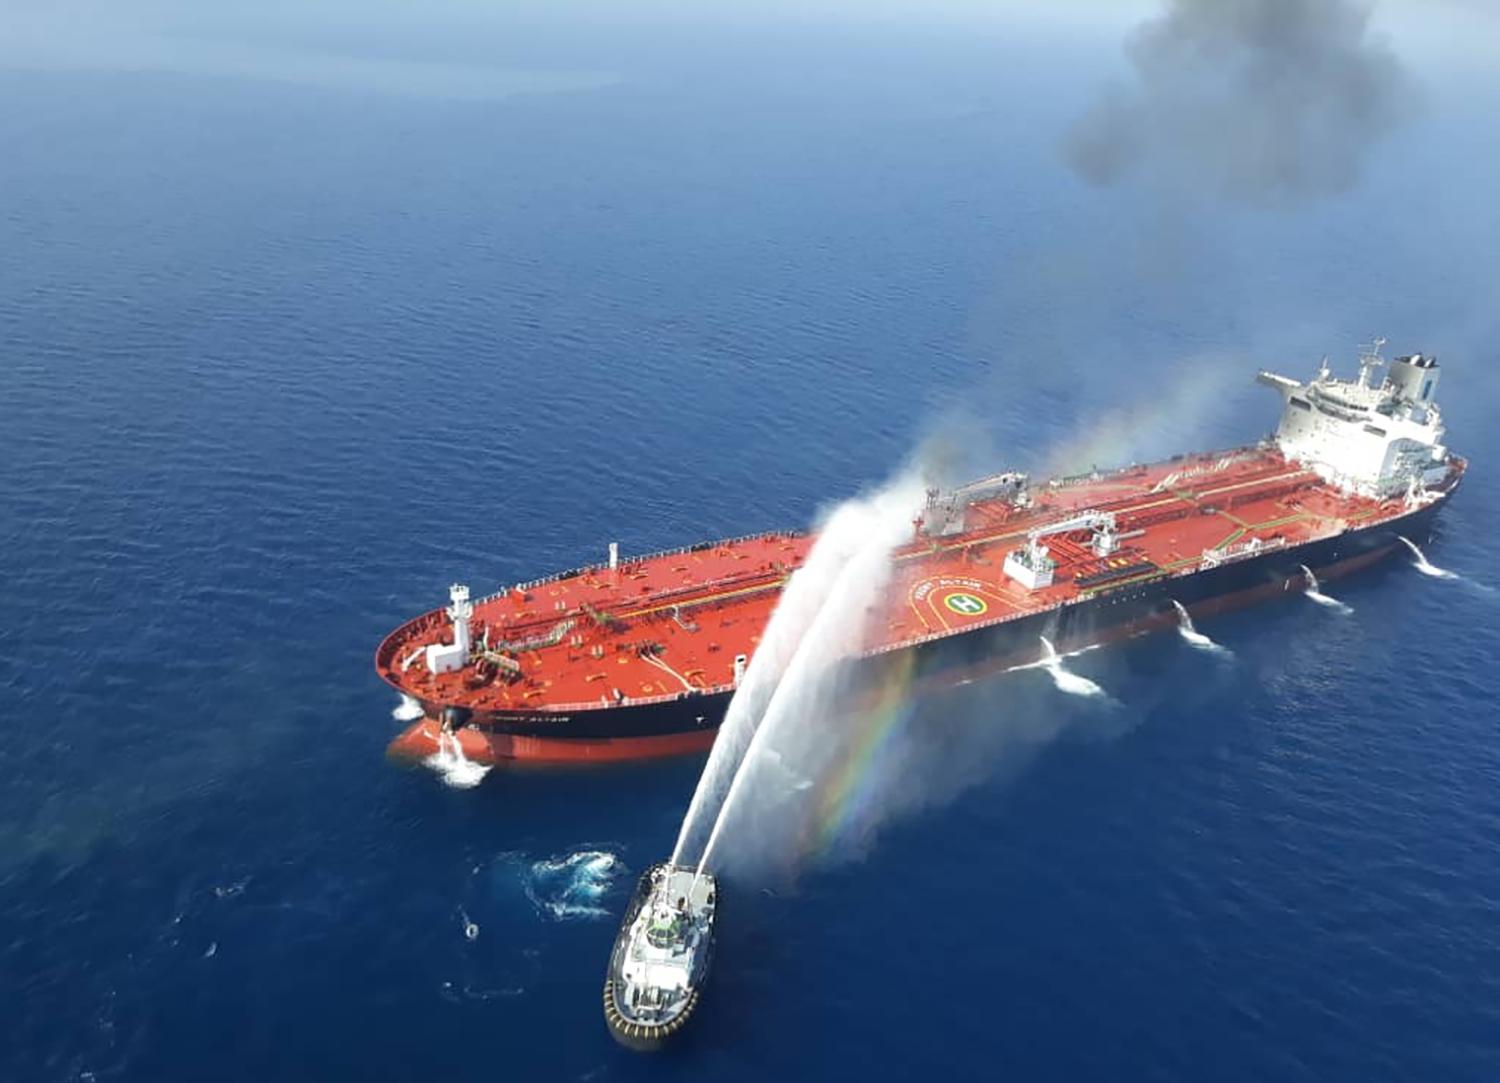 Norwegian-owned Front Altair tanker that was attacked in the waters of the Gulf of Oman